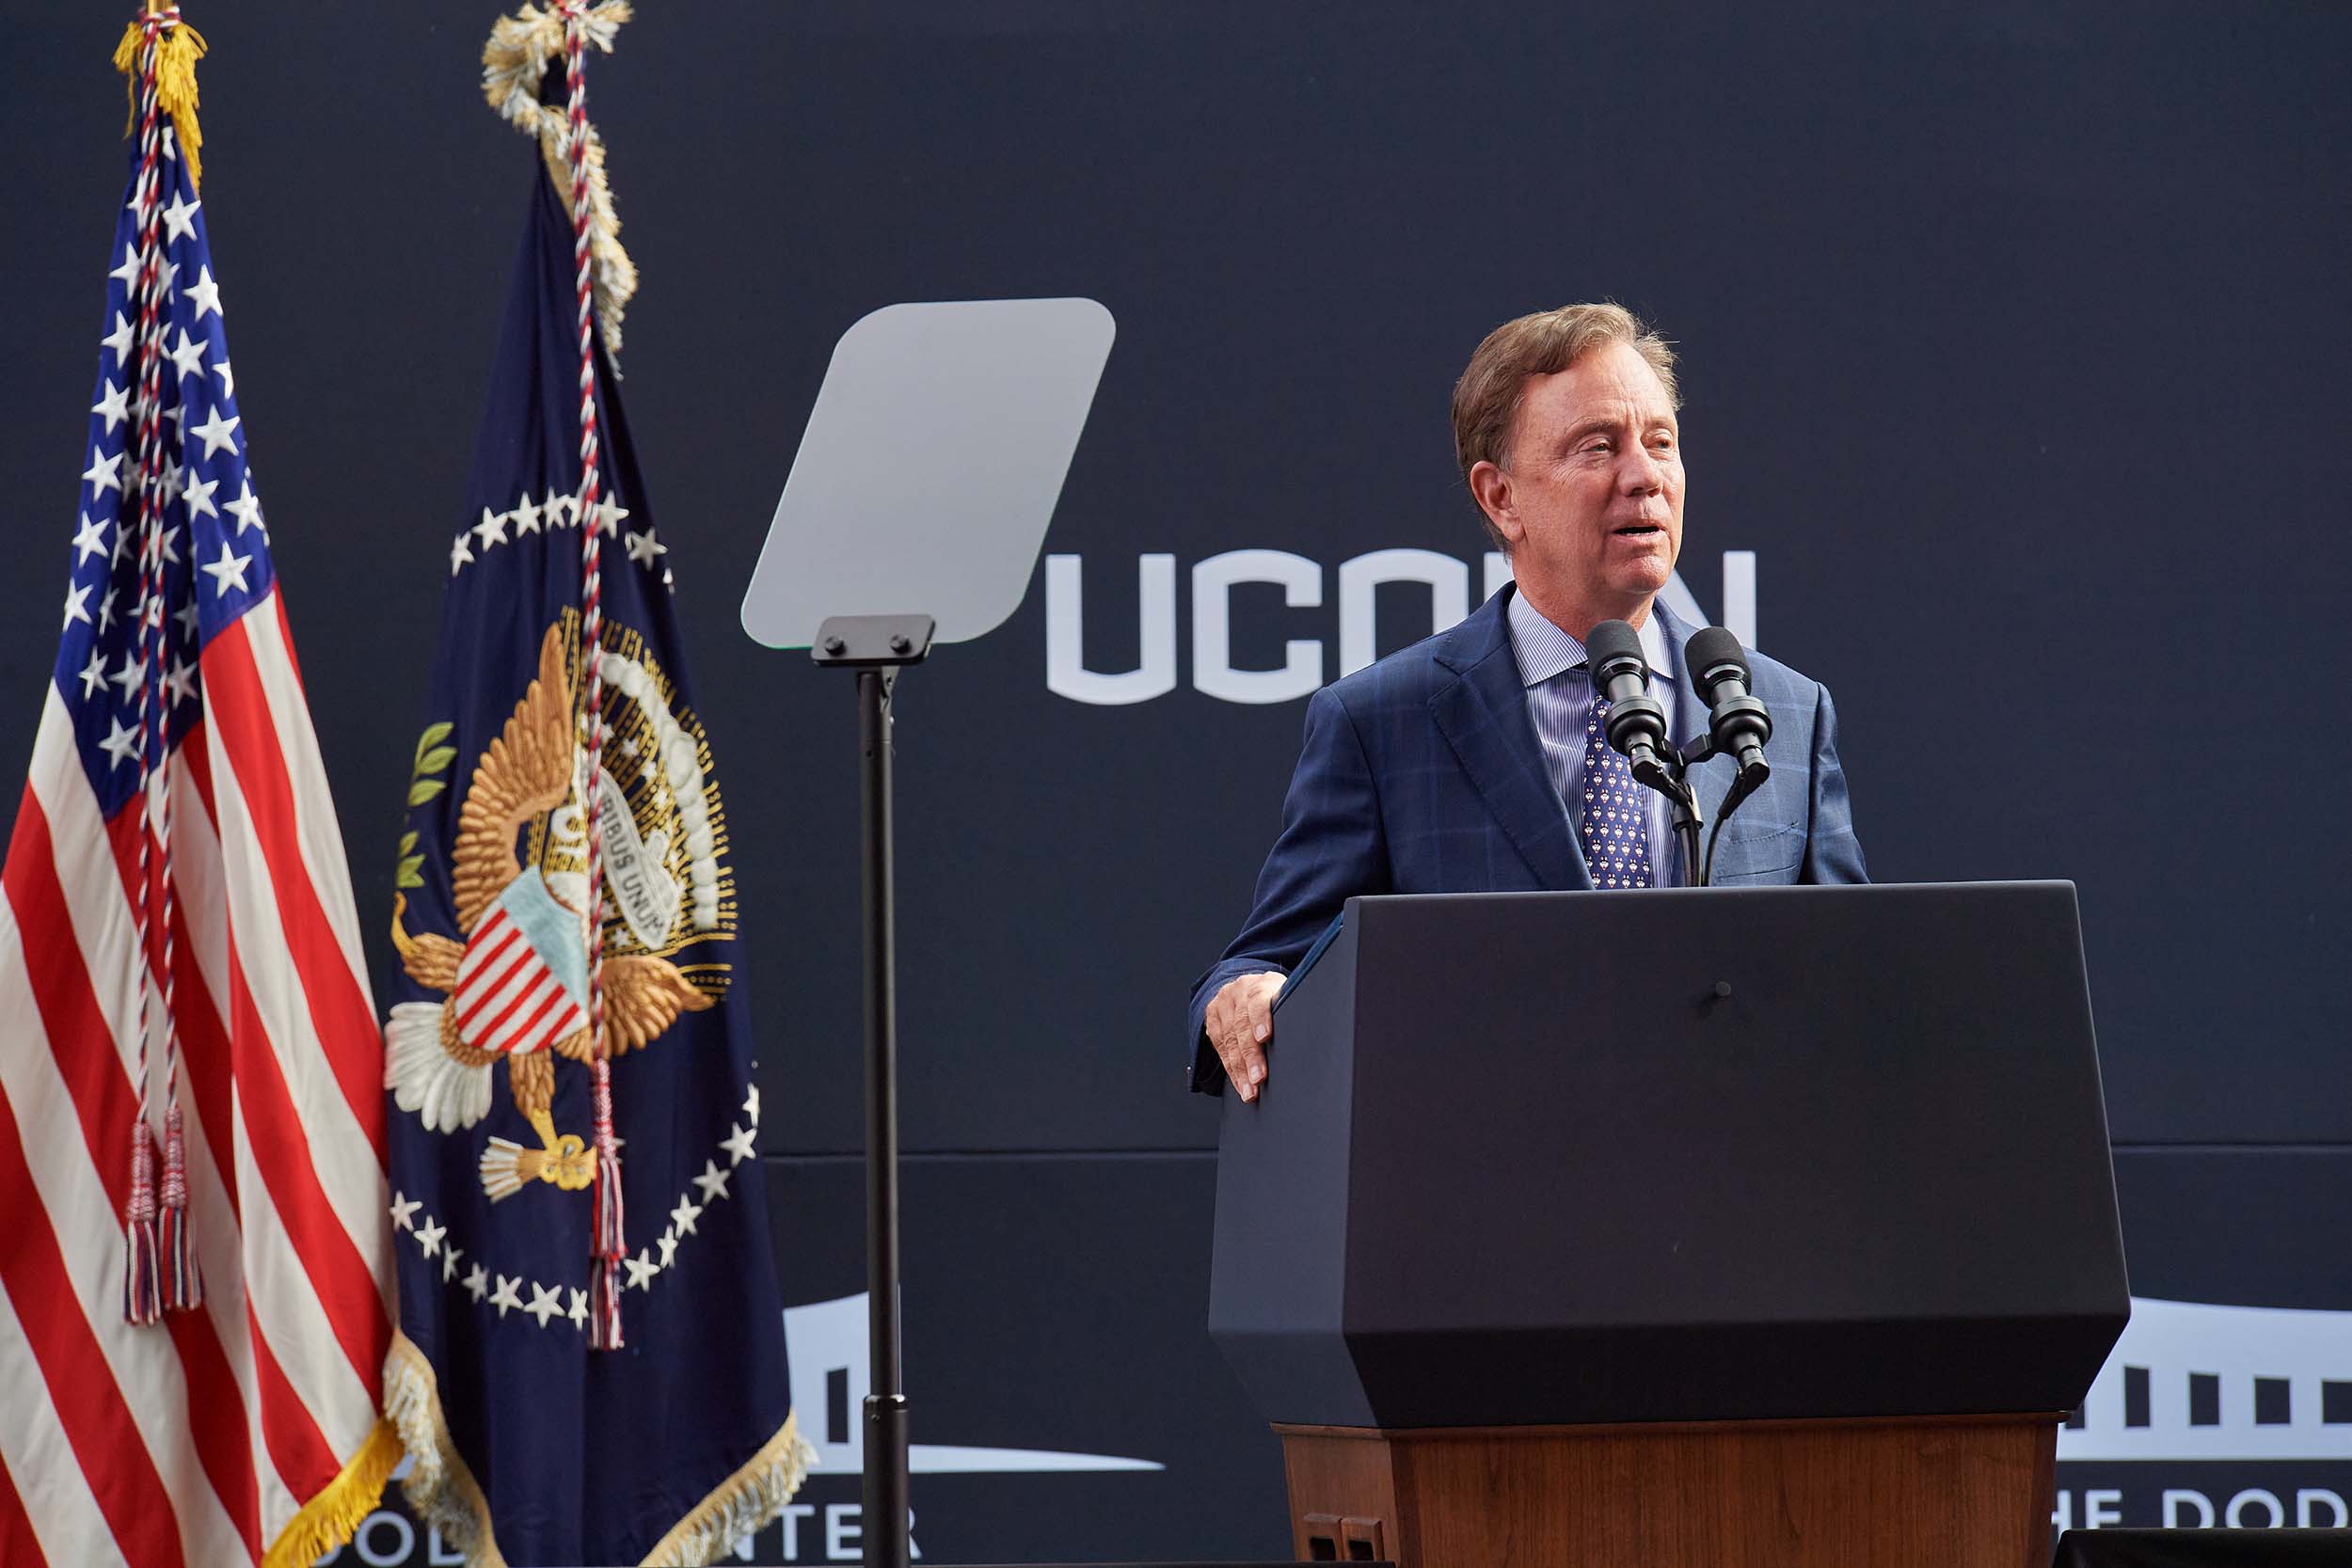 Gov. Ned Lamont speaks during the dedication ceremony of The Dodd Center for Human Rights at the University of Connecticut main campus in Storrs on Oct. 15, 2021